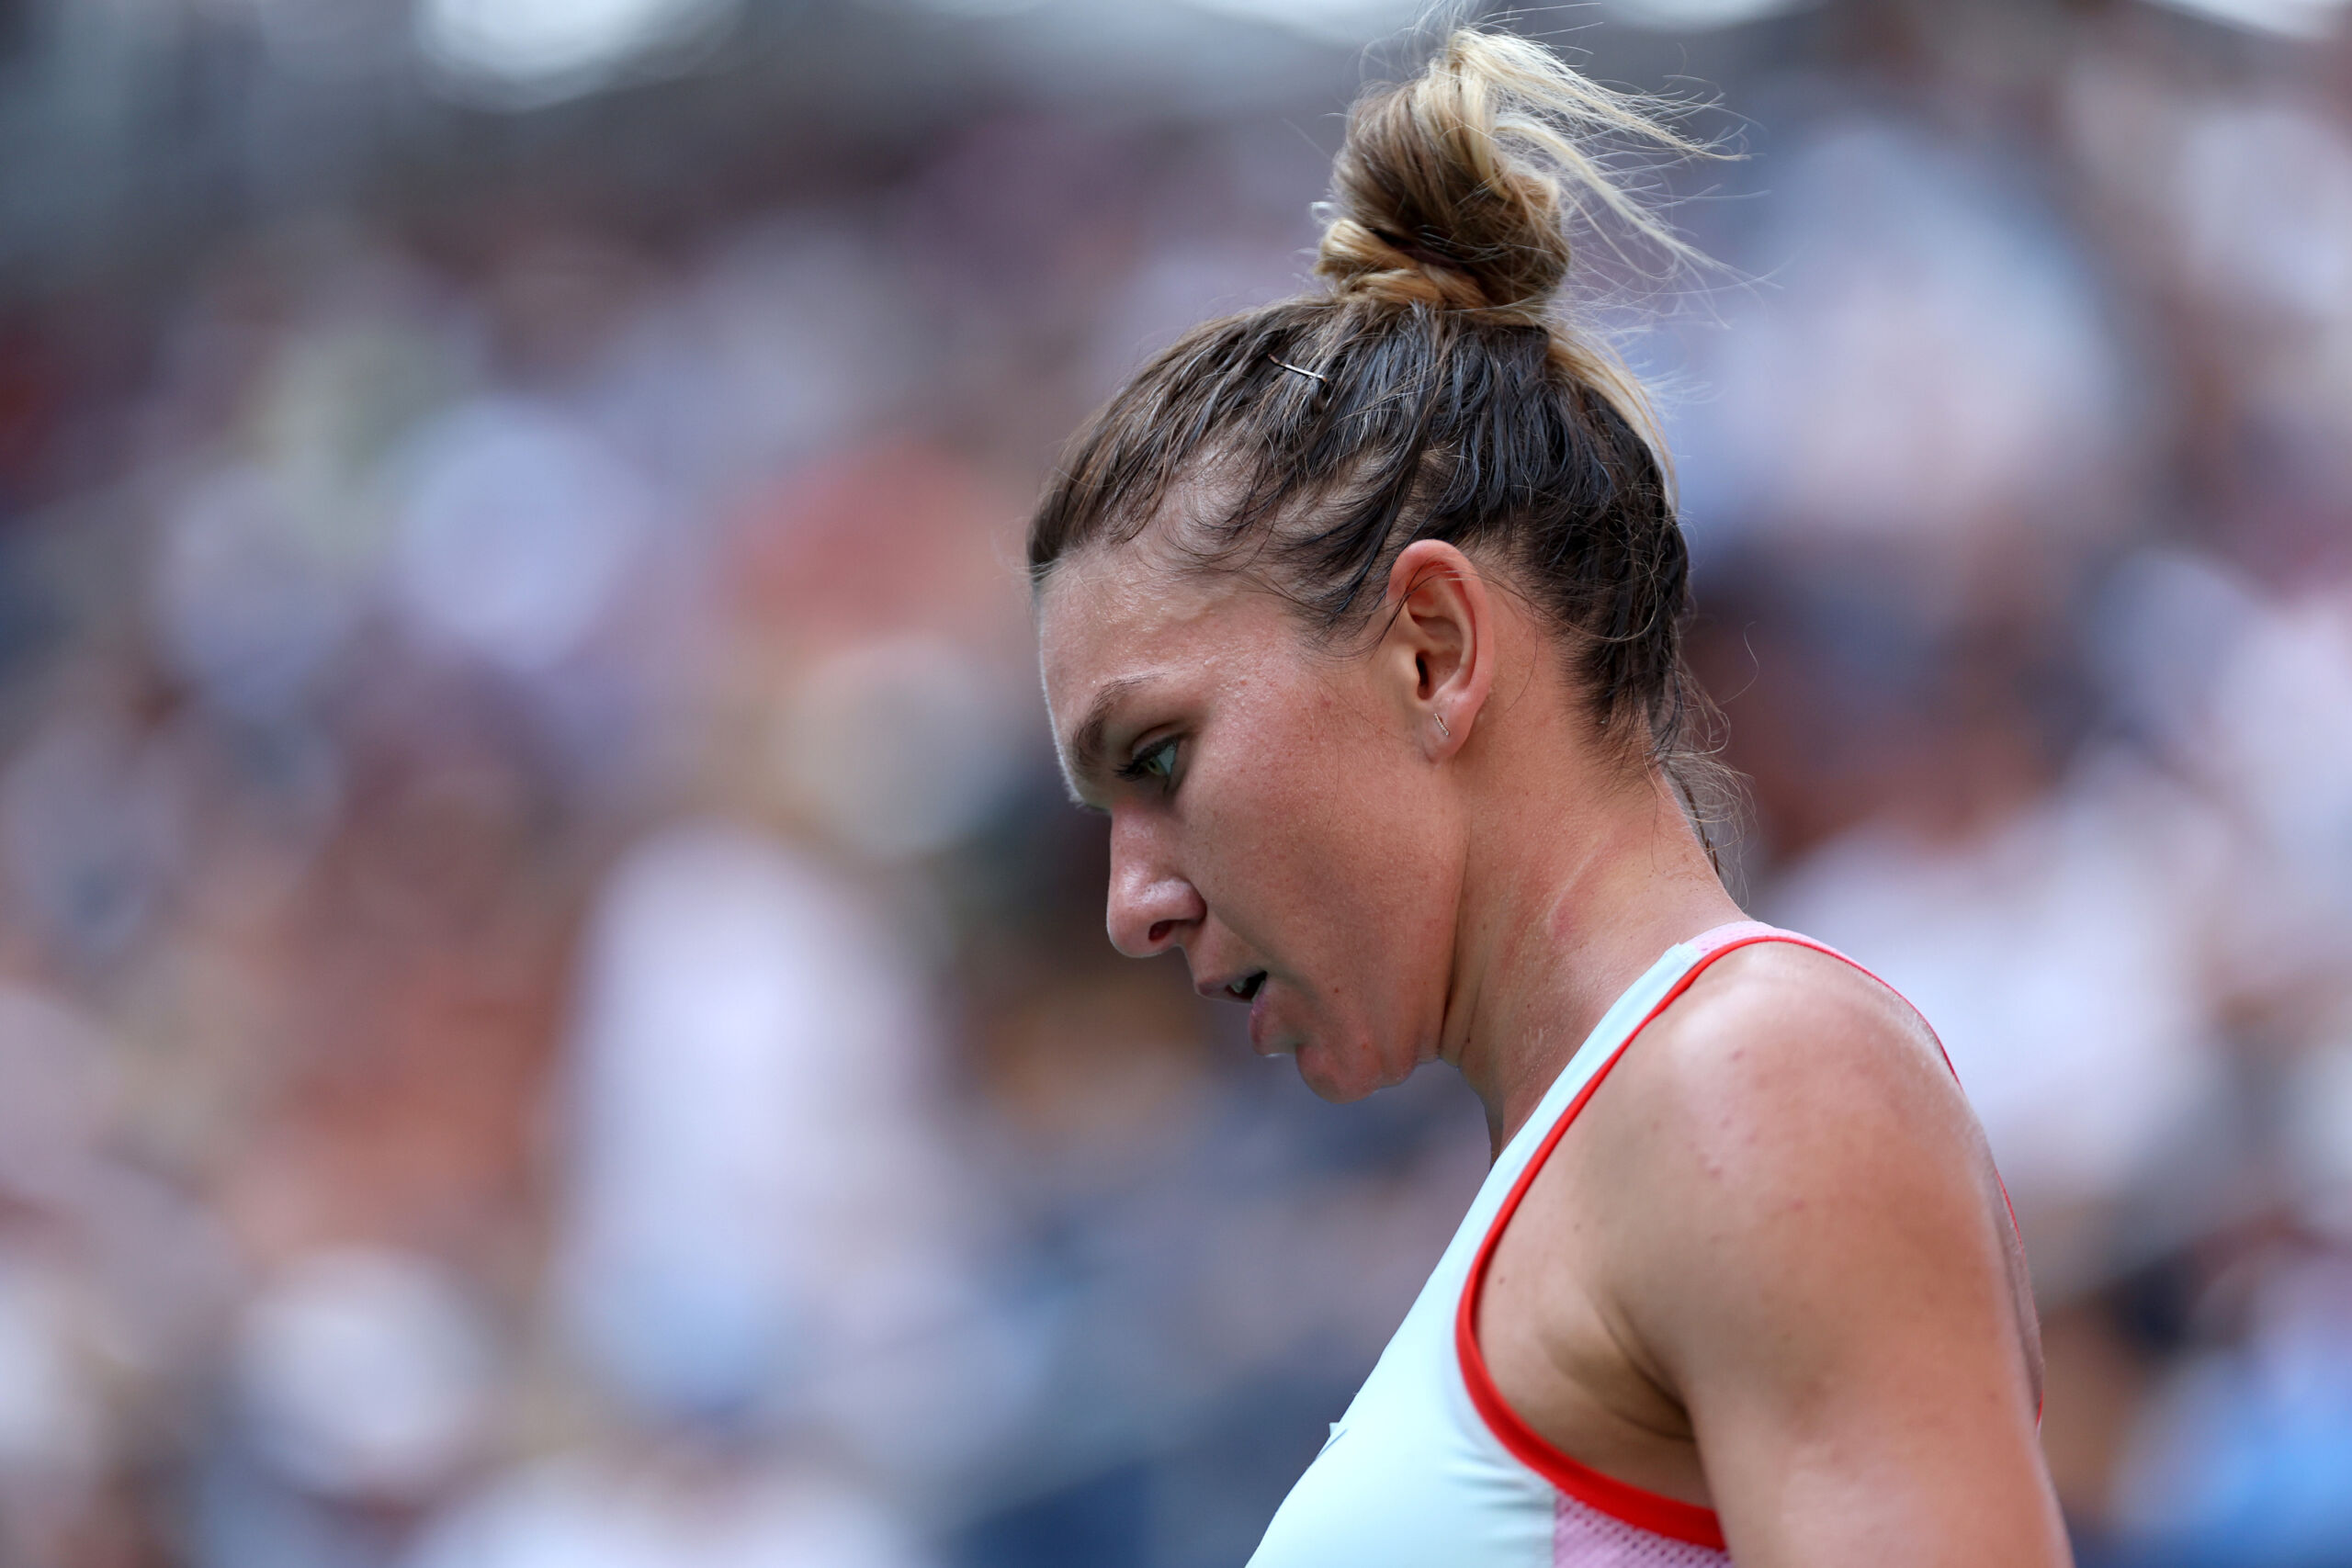 US Open Simona Halep out while suspended, and draw wont be live